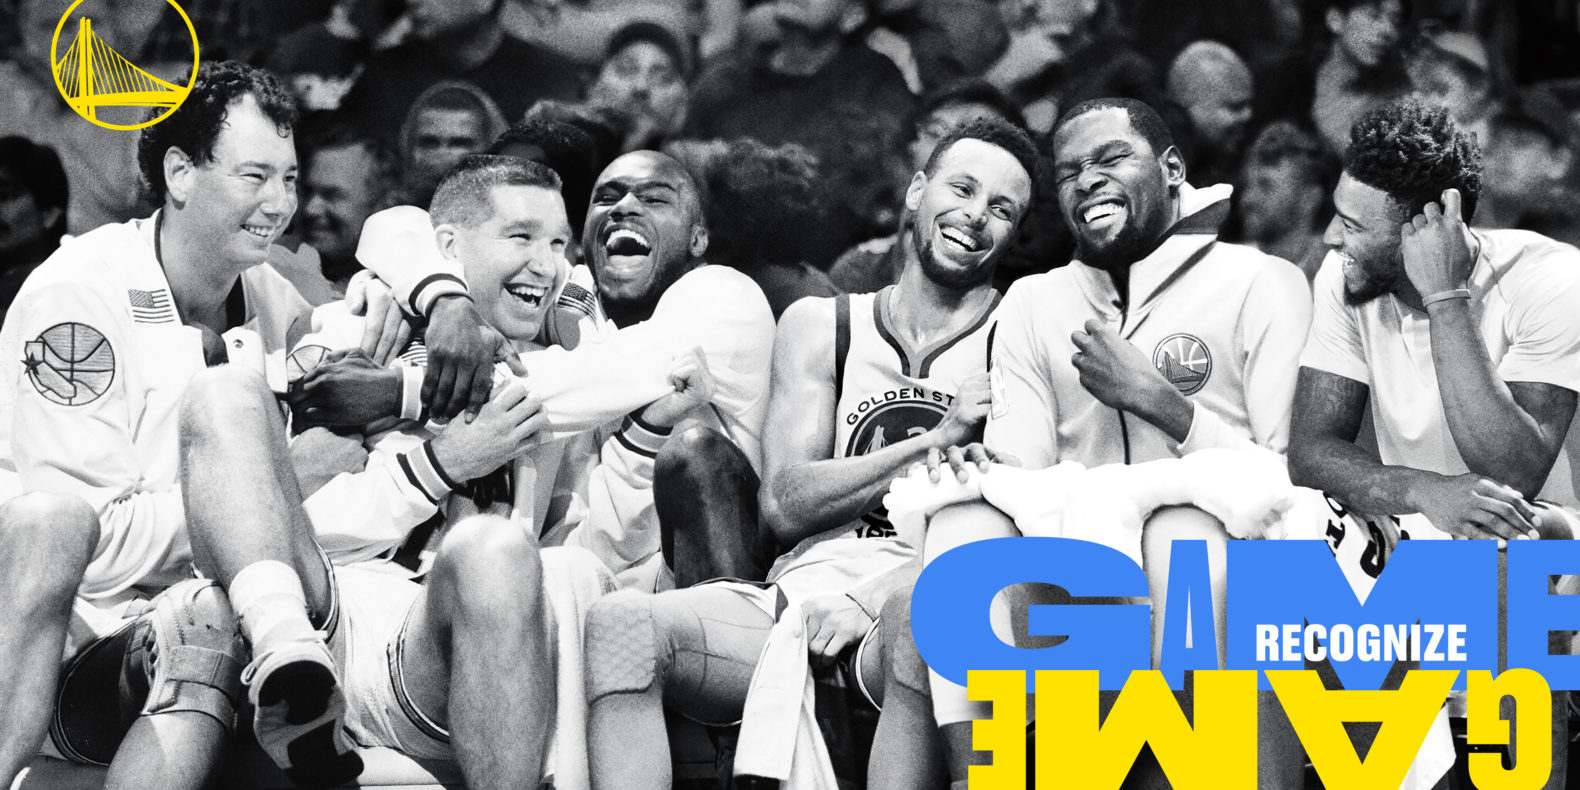 Black and white photo of a group of Golden State Warriors basketball players sitting on the sidelines. They are laughing and poking good fun at each other. The team’s logo is in the top left corner in golden yellow and on the bottom right corner is text that reads “game recognize game” but the second “game” is upside down.